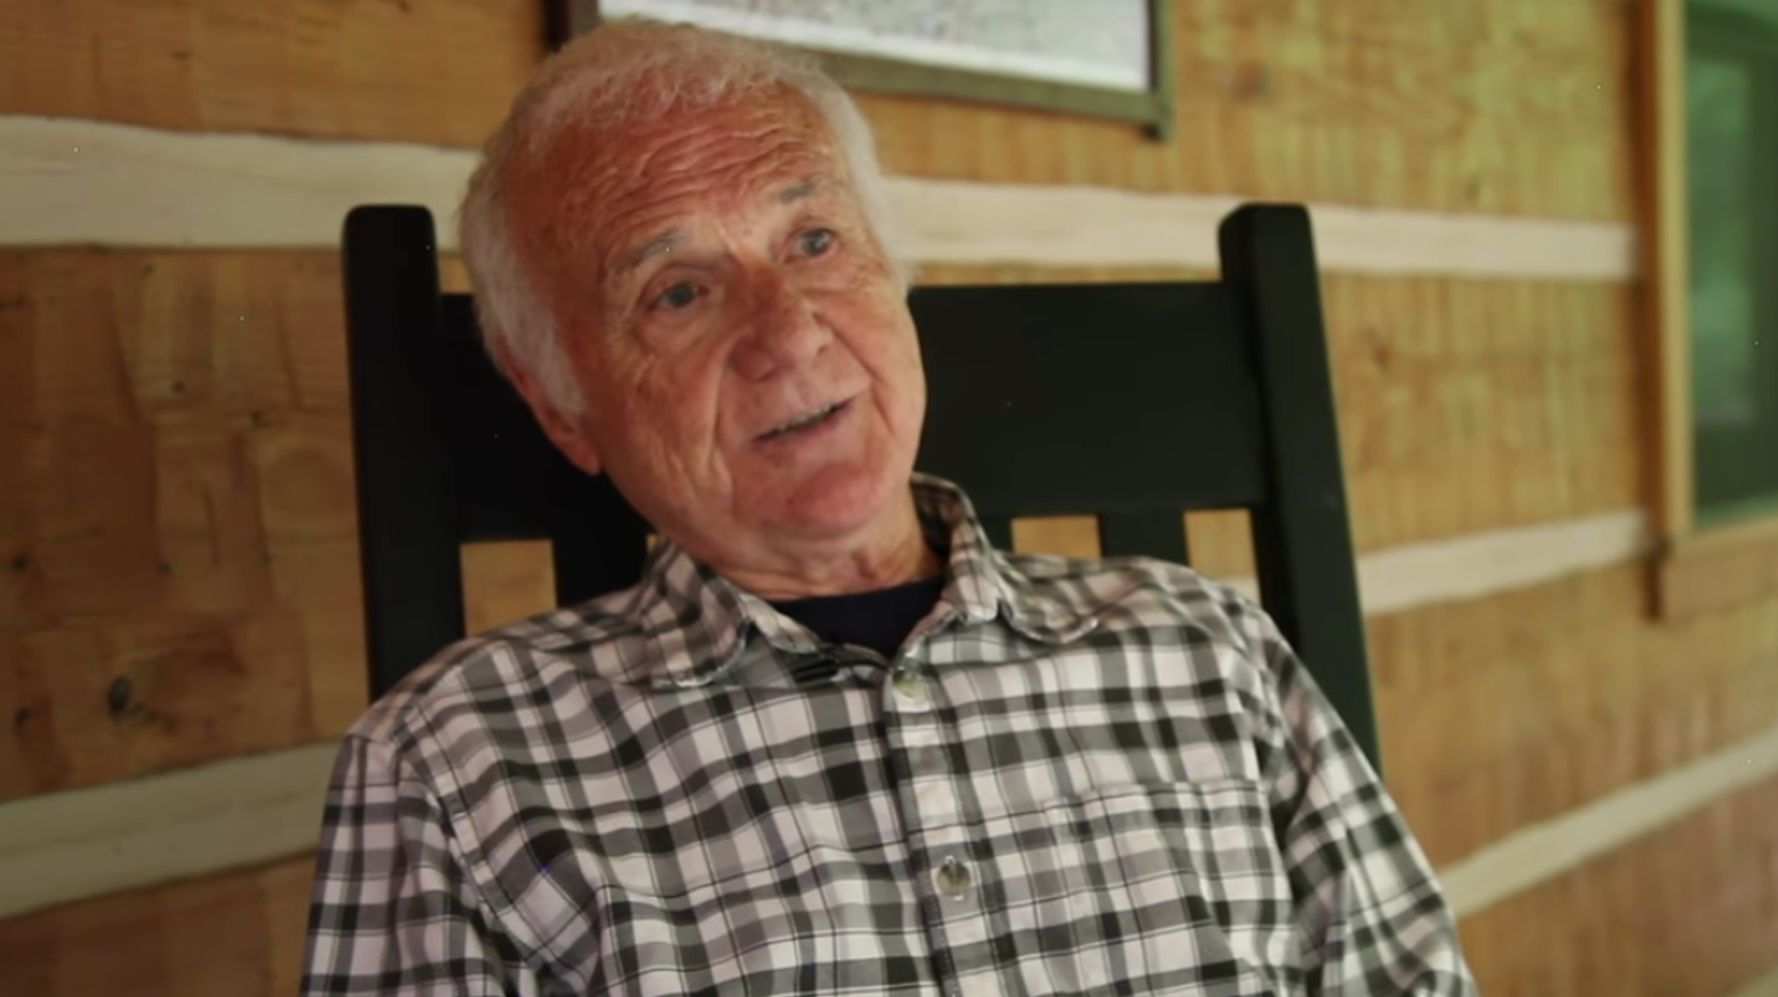 Older Women And Young Boy Film - This 83-Year-Old Man Just Starred In His First Porn | HuffPost